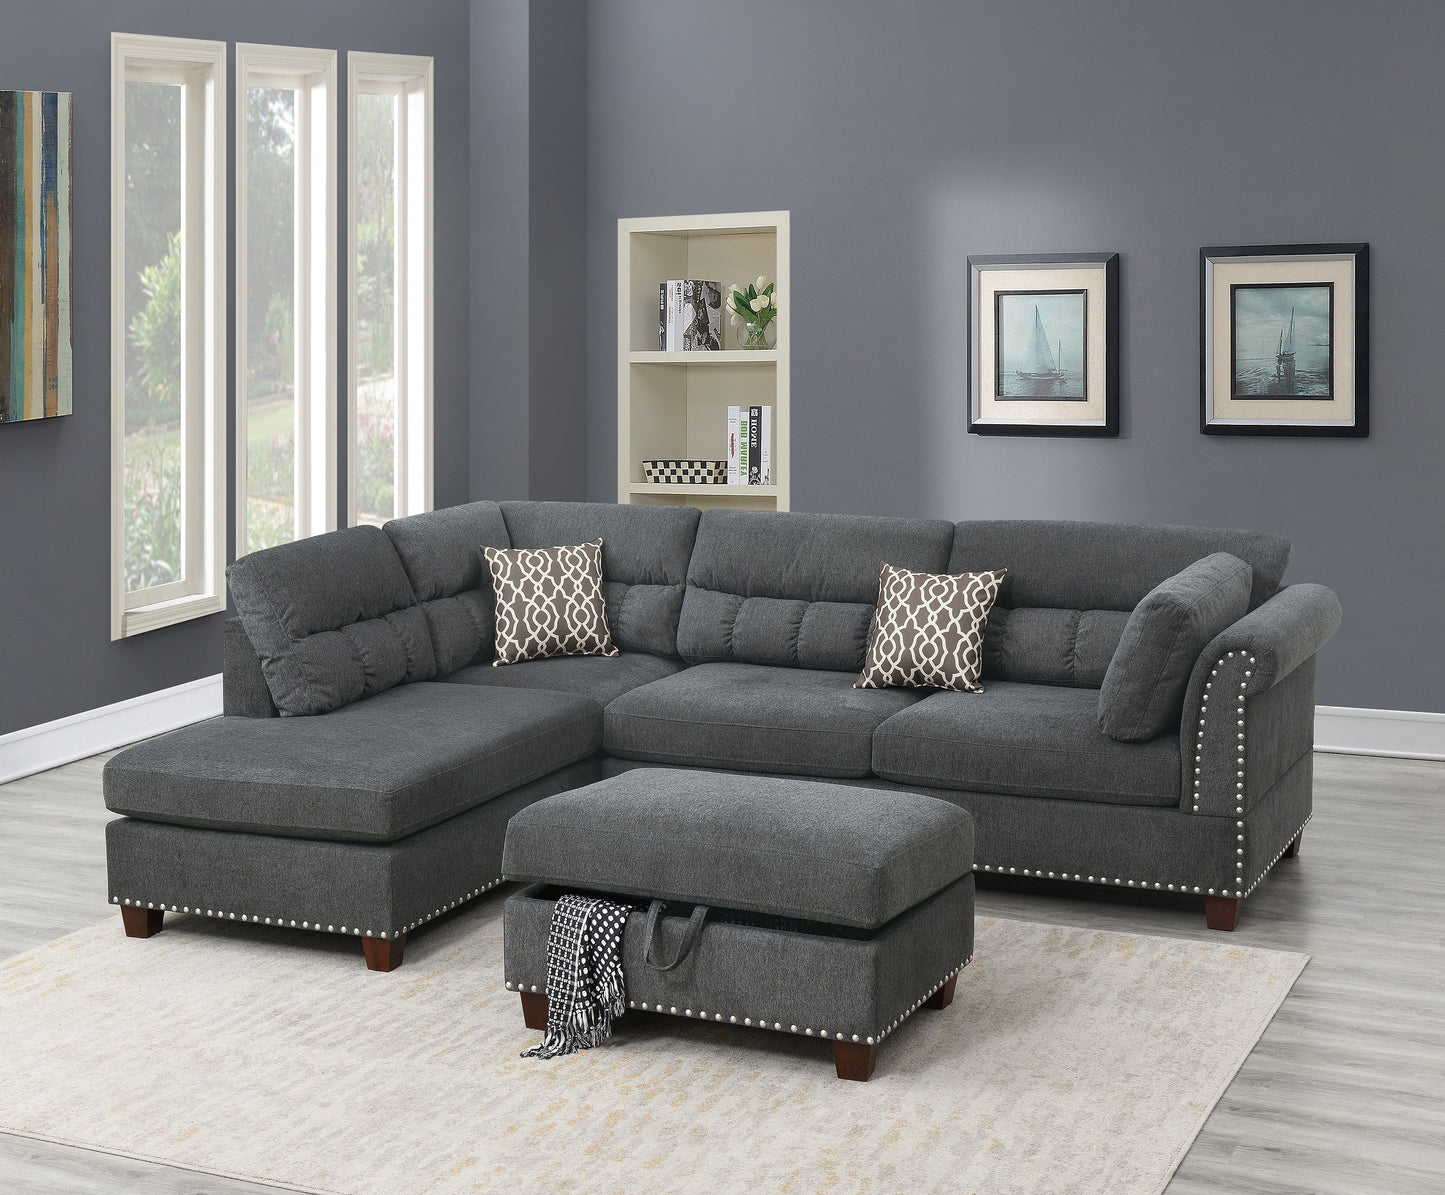 Sectional sofa Slate Color Velvet Fabric Reversible Chaise Sofa Sectional w Pillows Cocktail Storage Ottoman 3pc Set